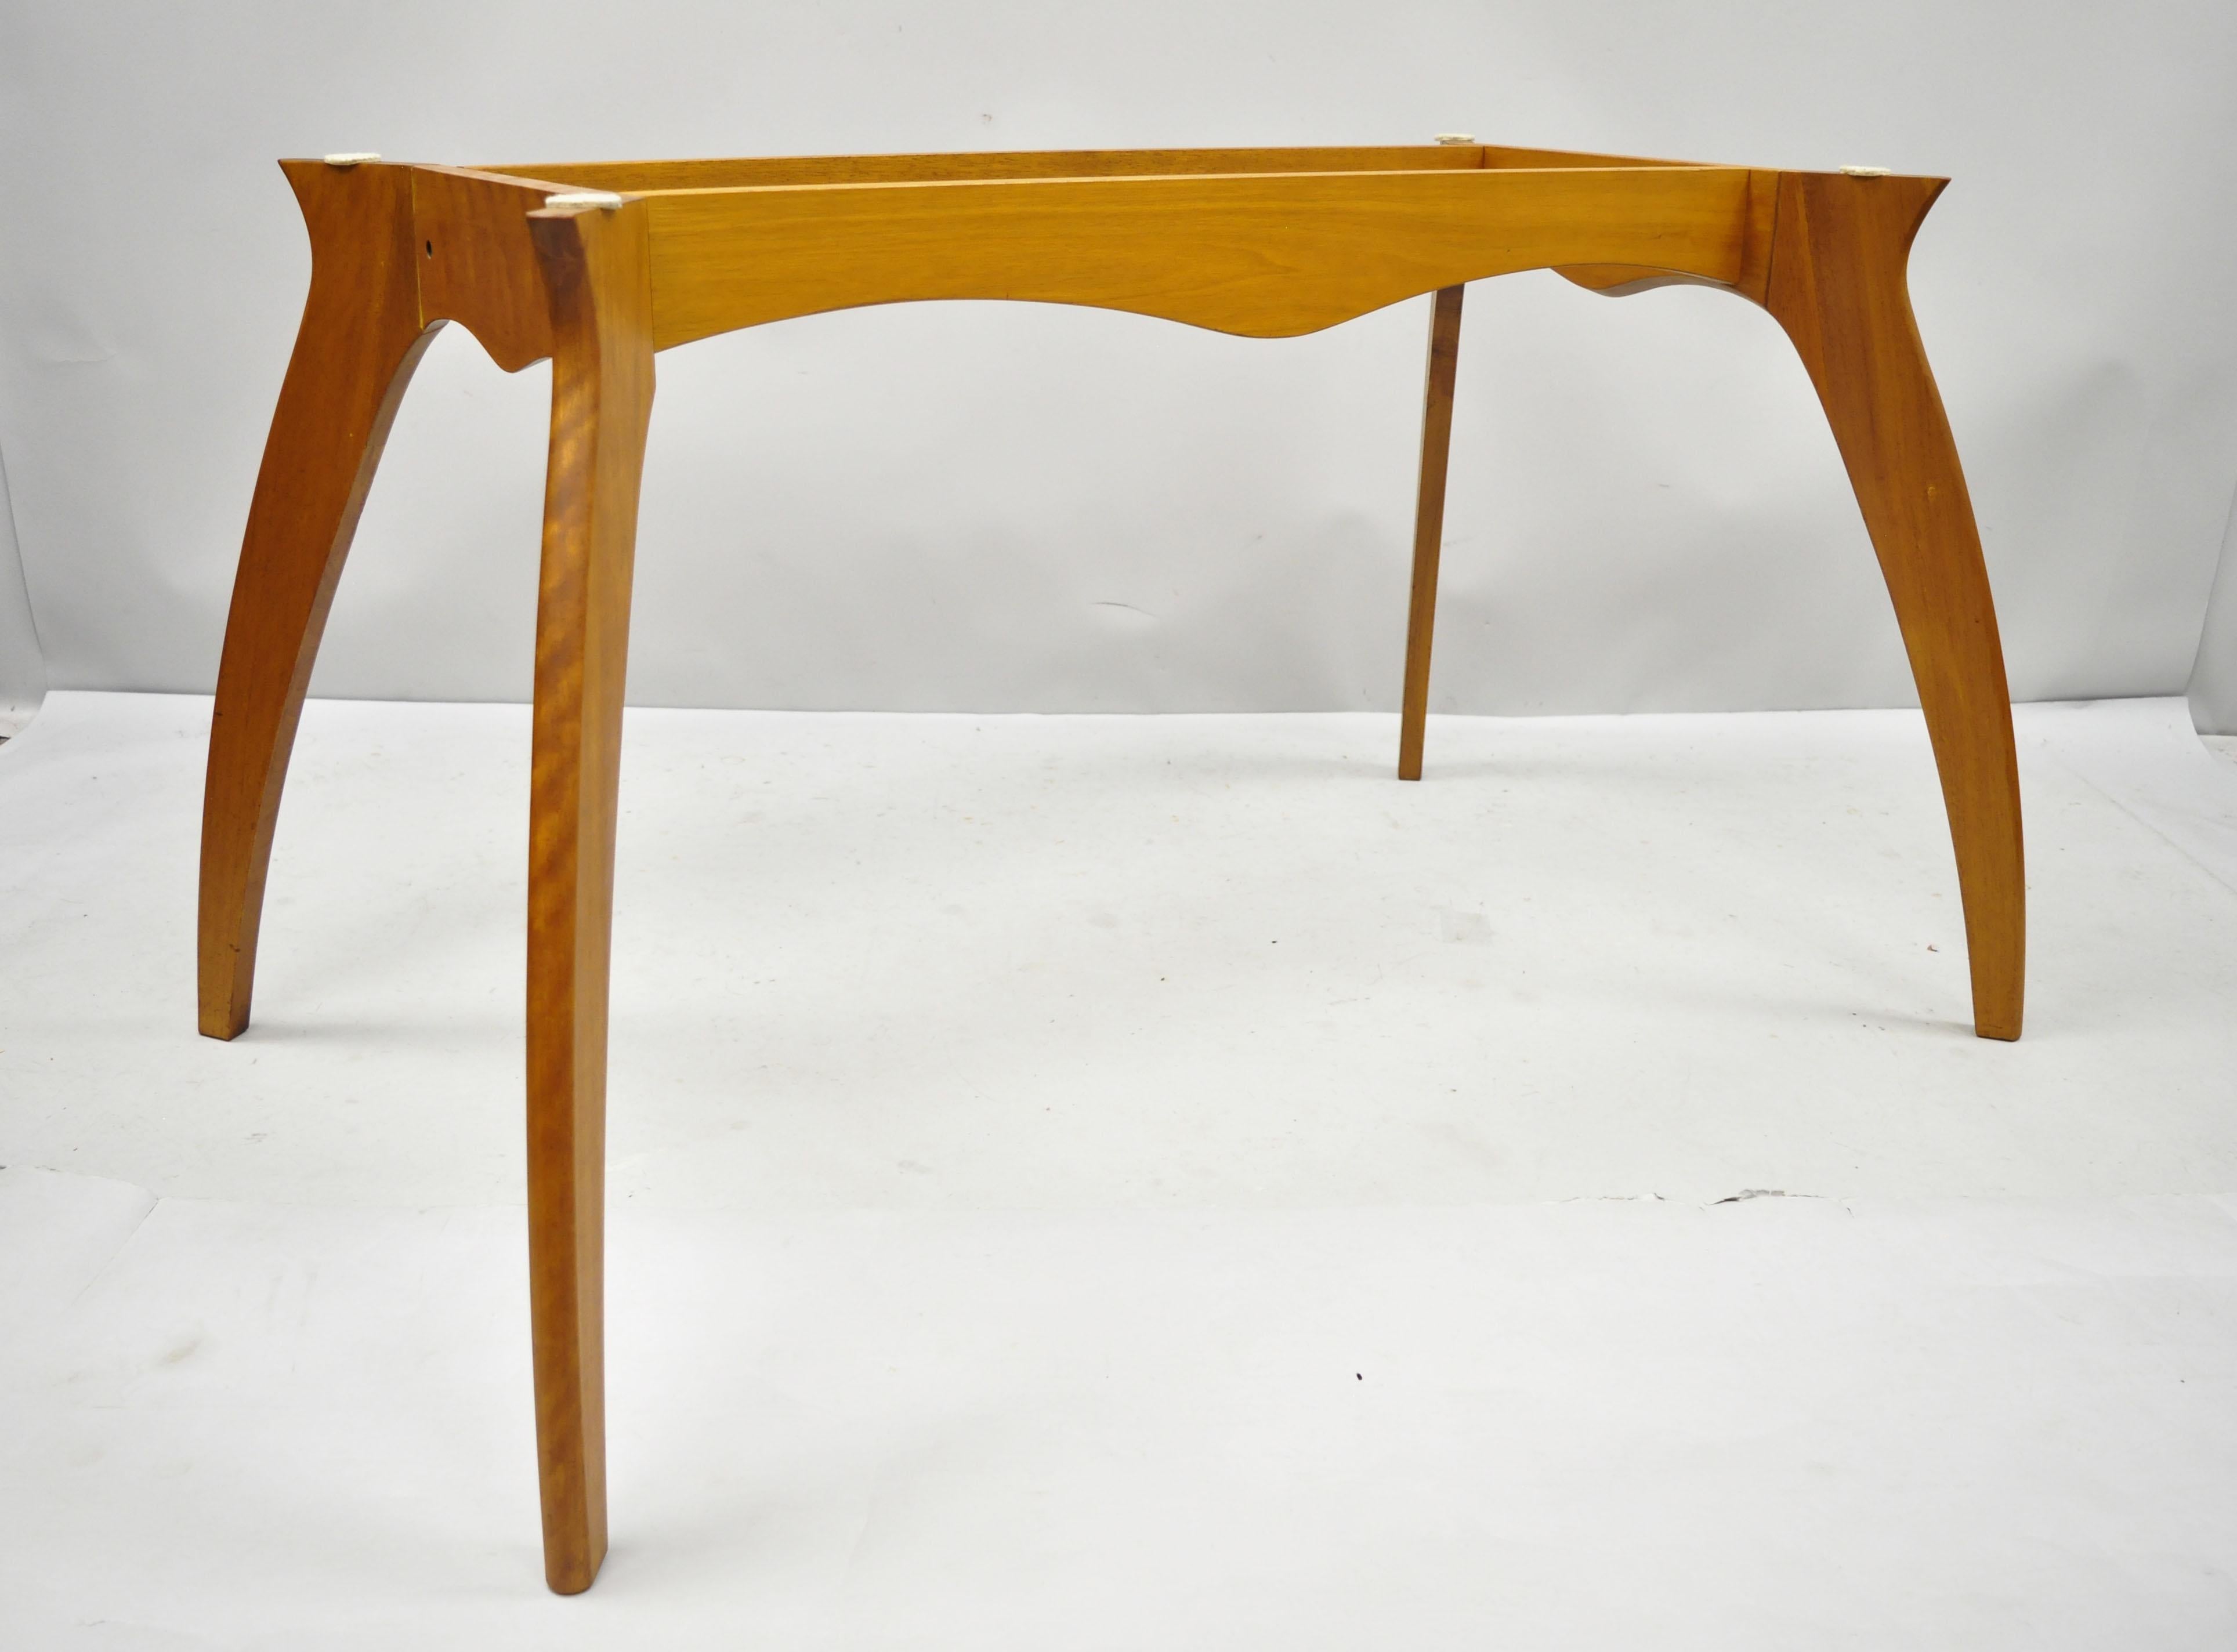 Mid Century Danish modern teak wood sculptural dining room table base. Item can be disassembled for shipping, solid wood frame, beautiful wood grain, tapered legs, sleek sculptural form, base only. Does not include top.
Age: Mid-late 20th